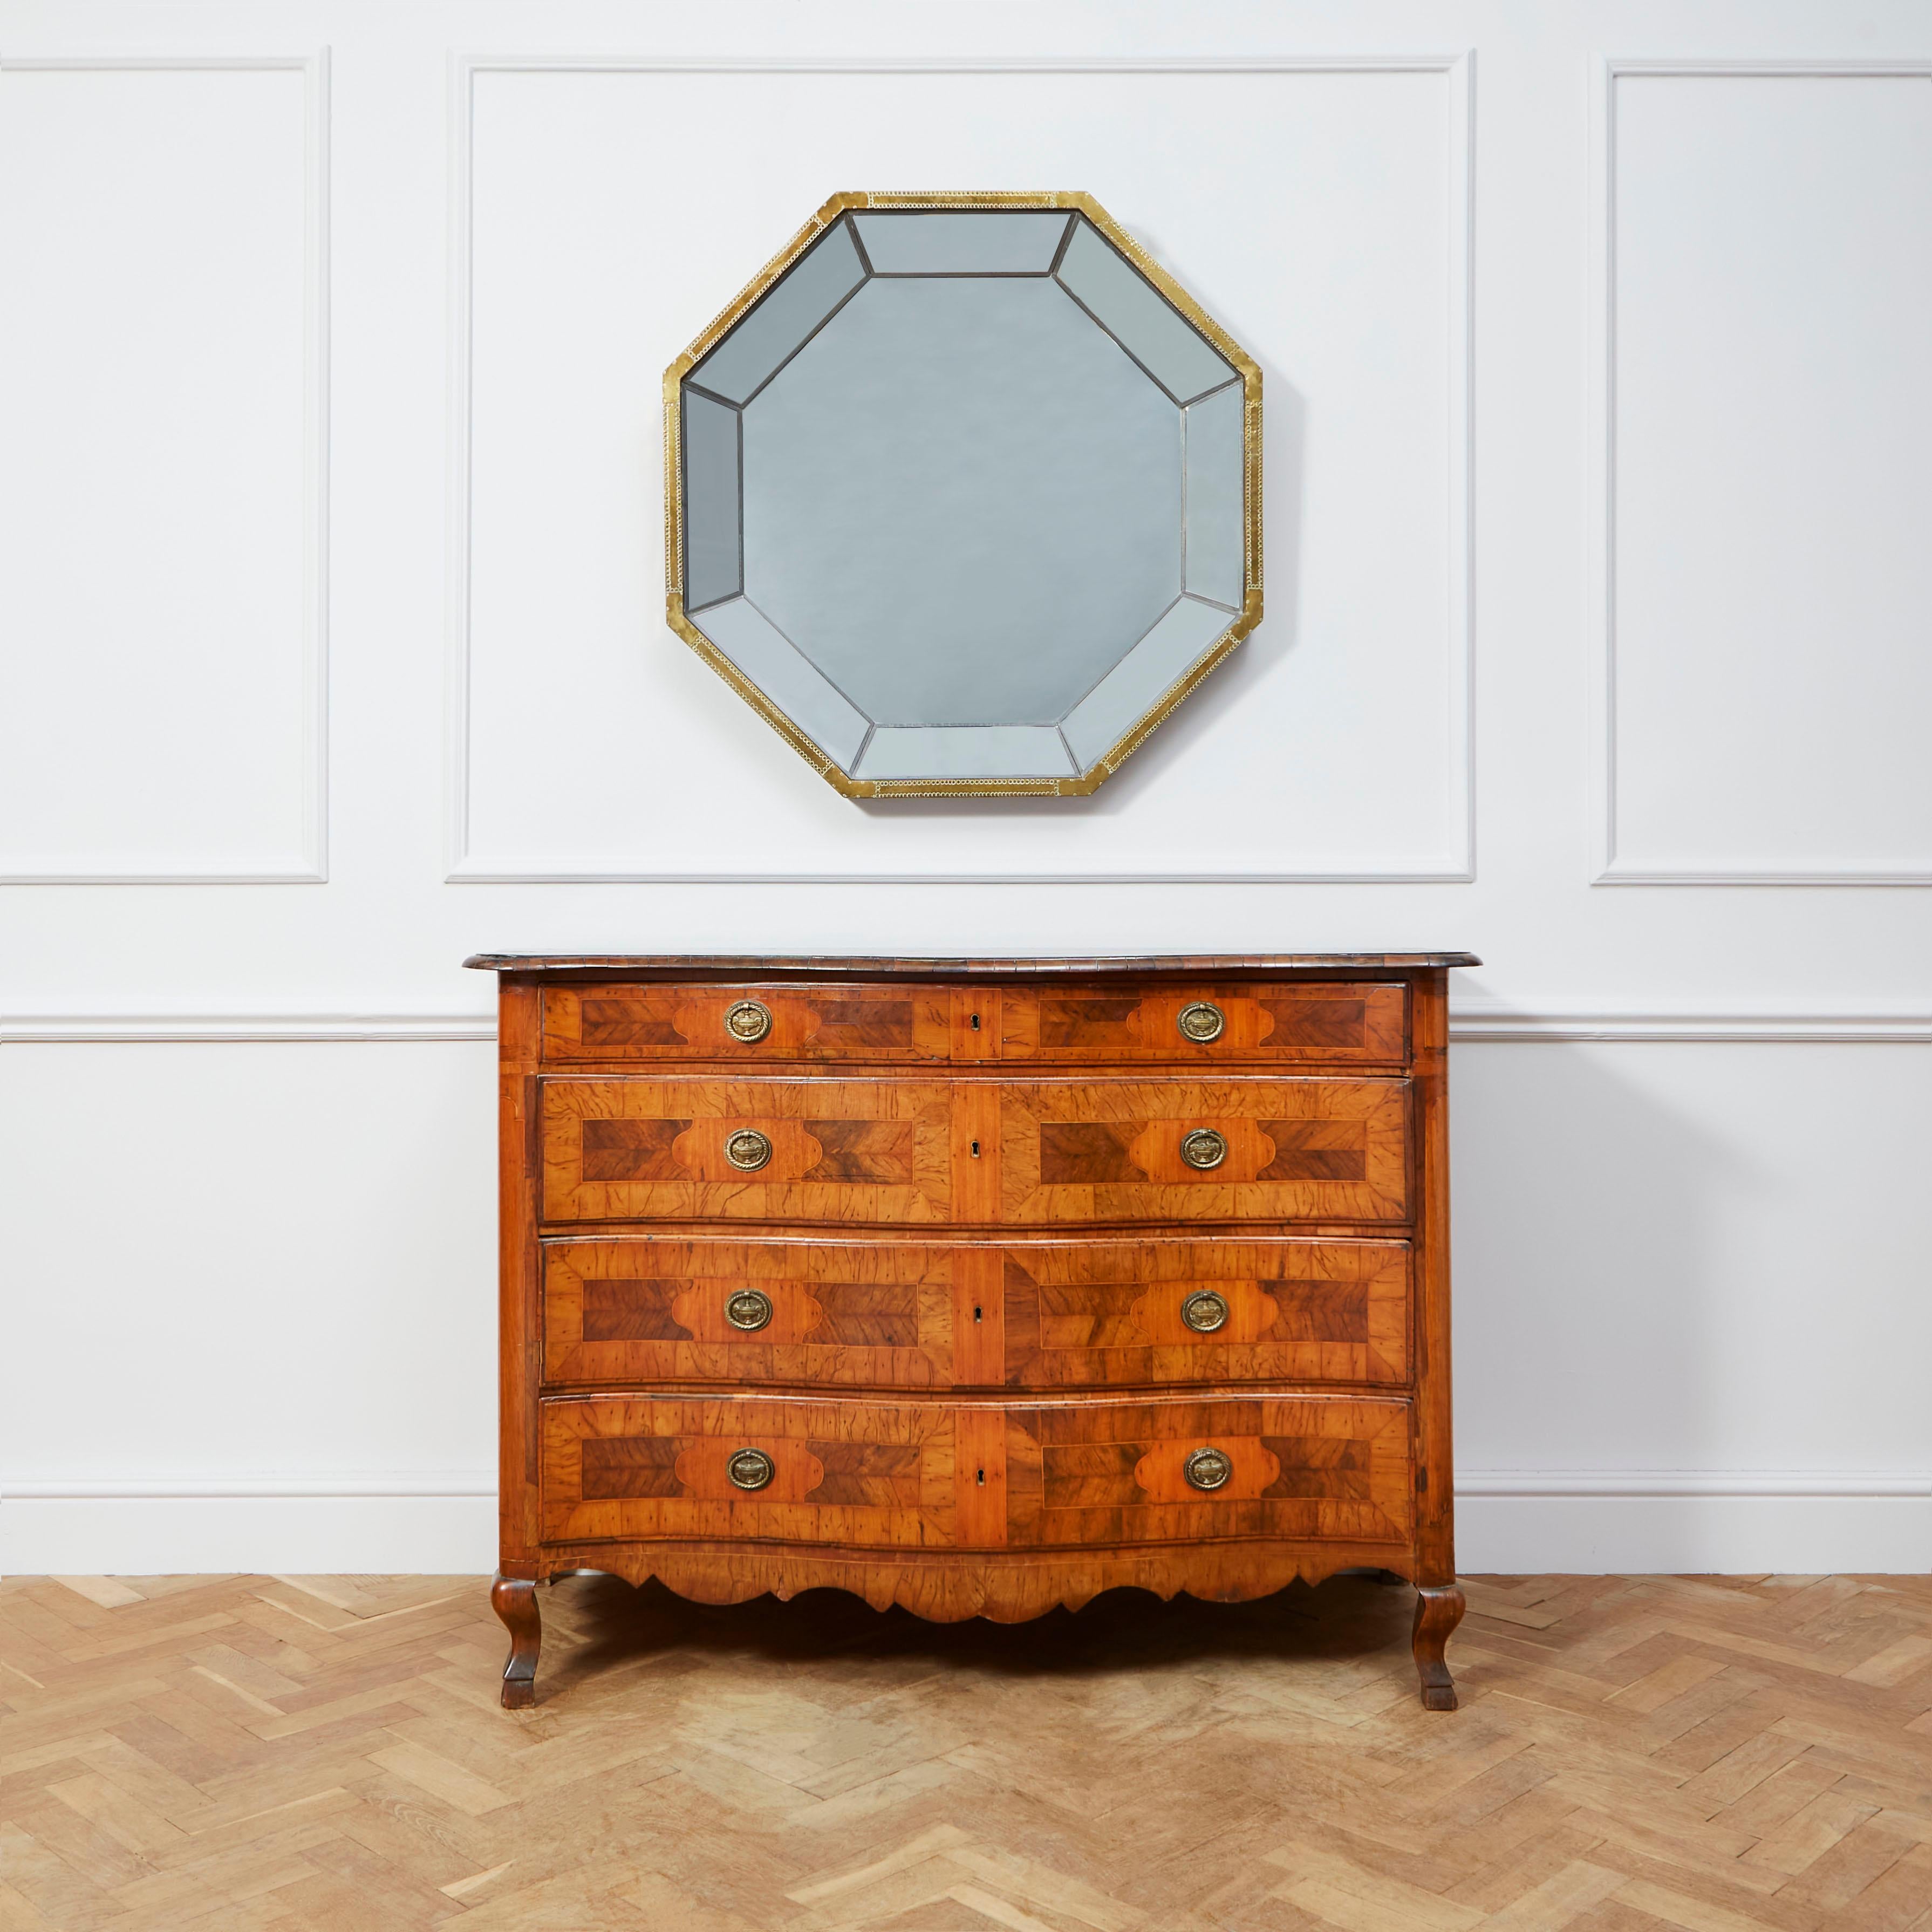 A fine fruitwood serpentine commode, the shaped top with cross banded veneers and two central lozenge motifs in limewood, above four long graduated drawers, the fronts decorated with panels of lime, olive and walnut and with original steel locks to